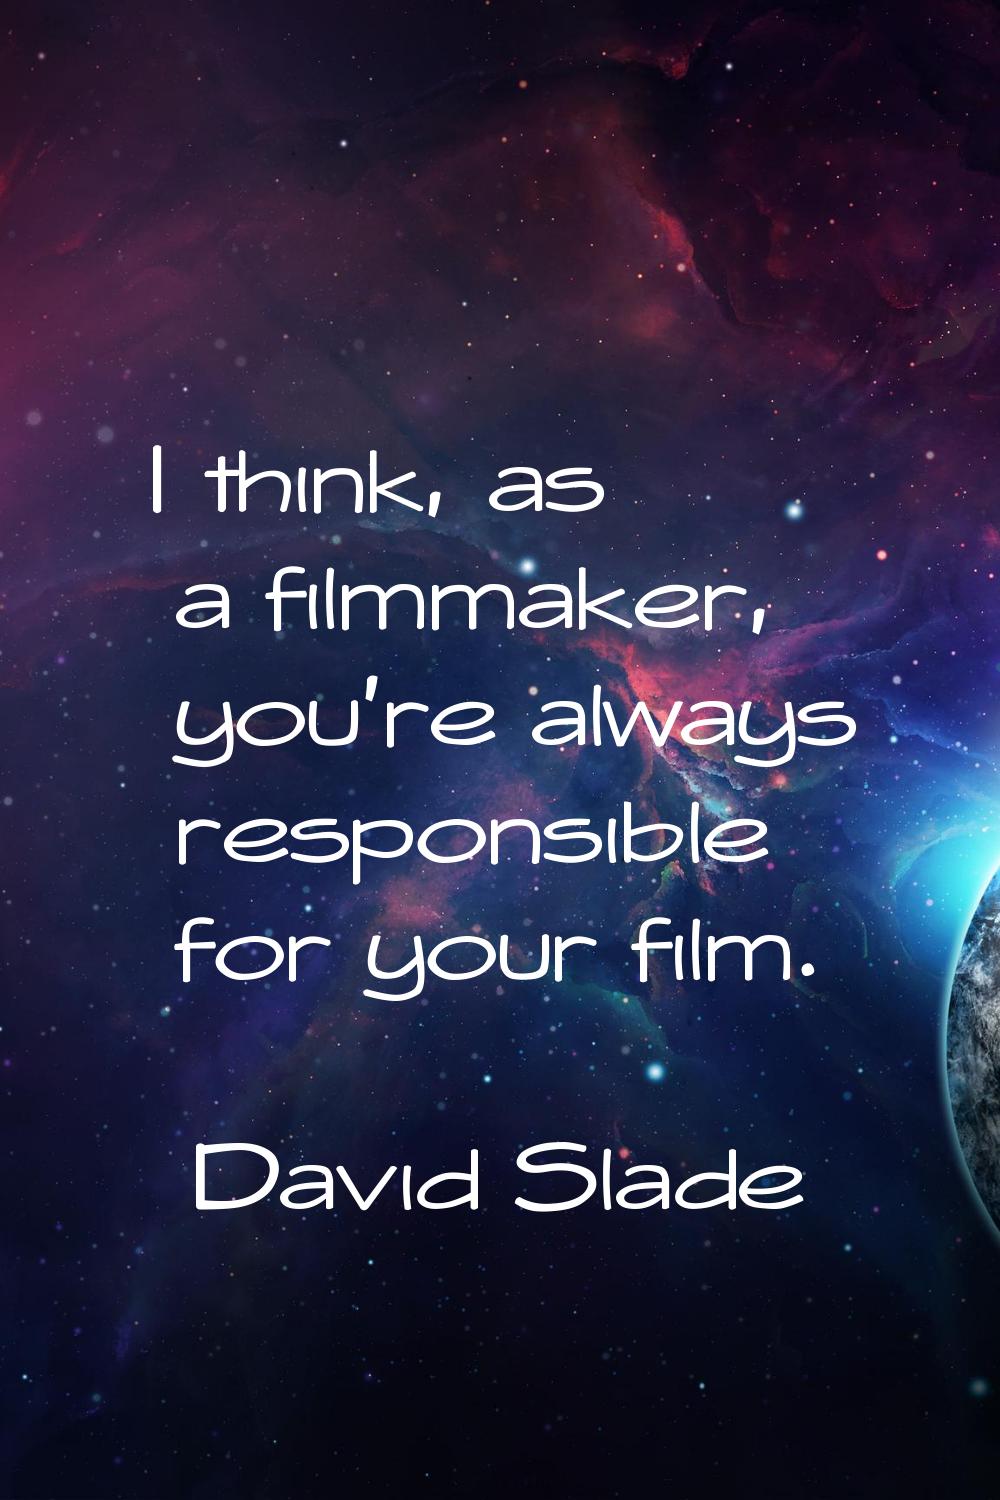 I think, as a filmmaker, you're always responsible for your film.